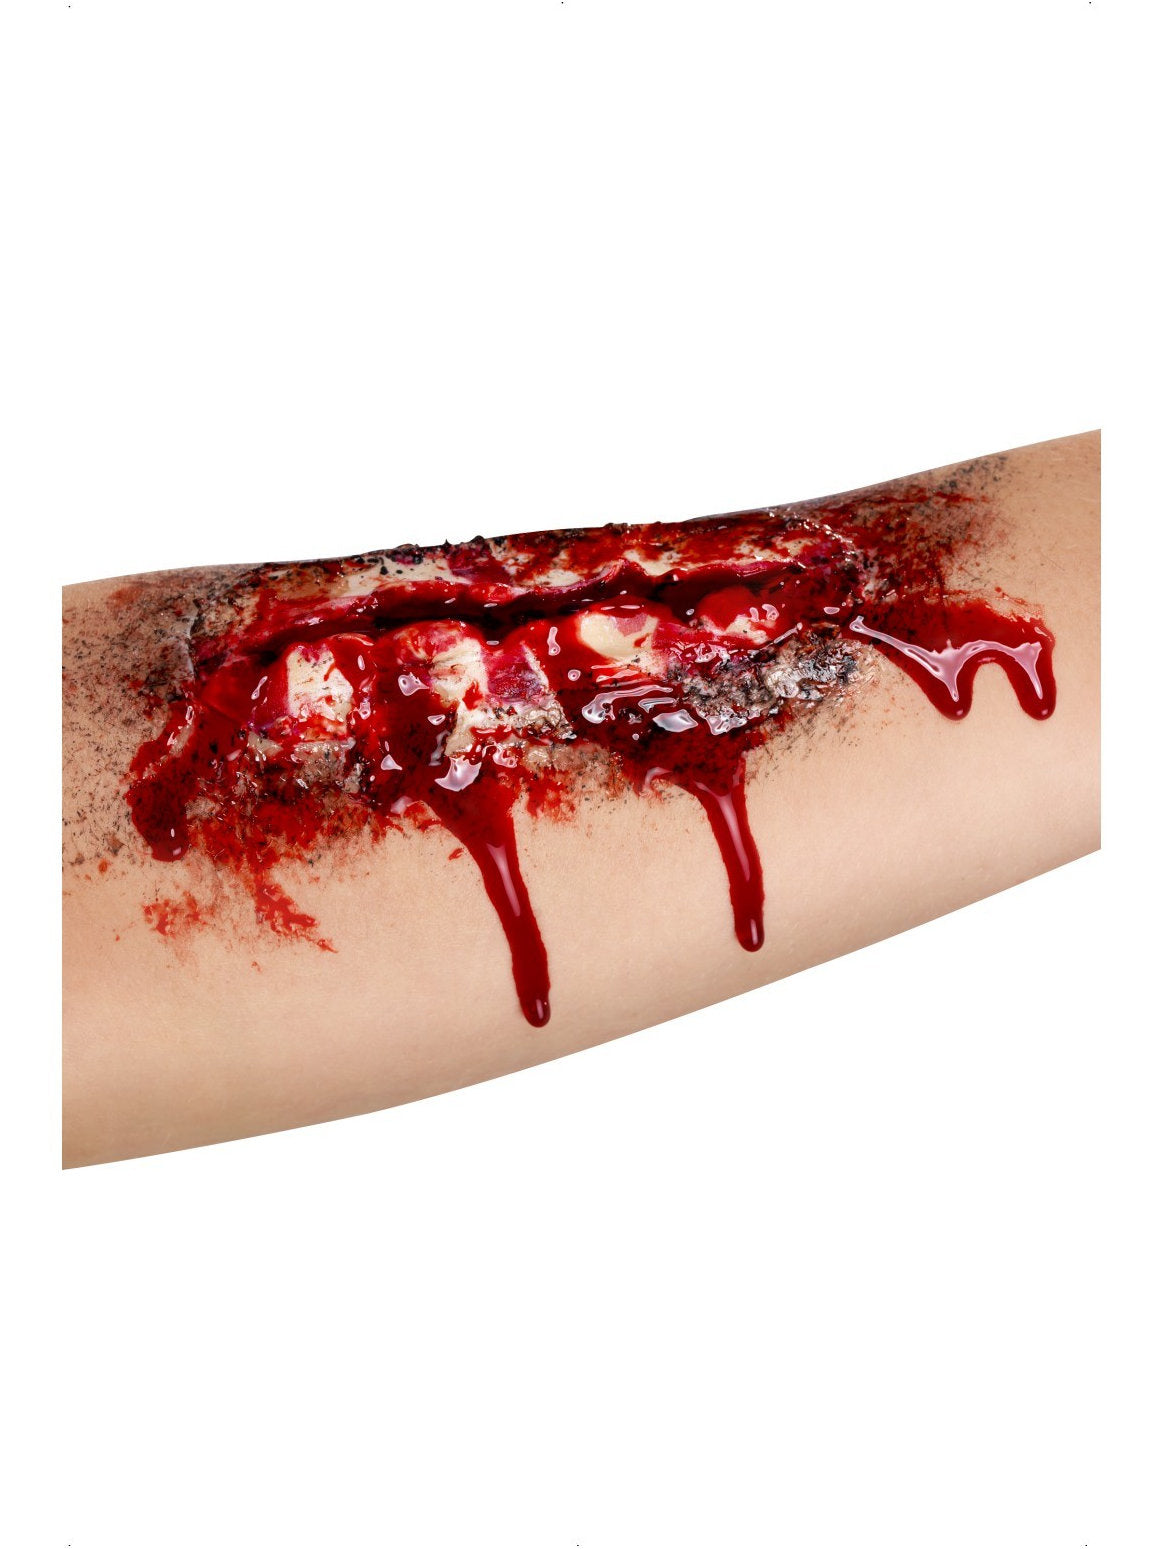 Open Wound Scar Latex Make-Up Zombie Halloween FX Large 25cm long